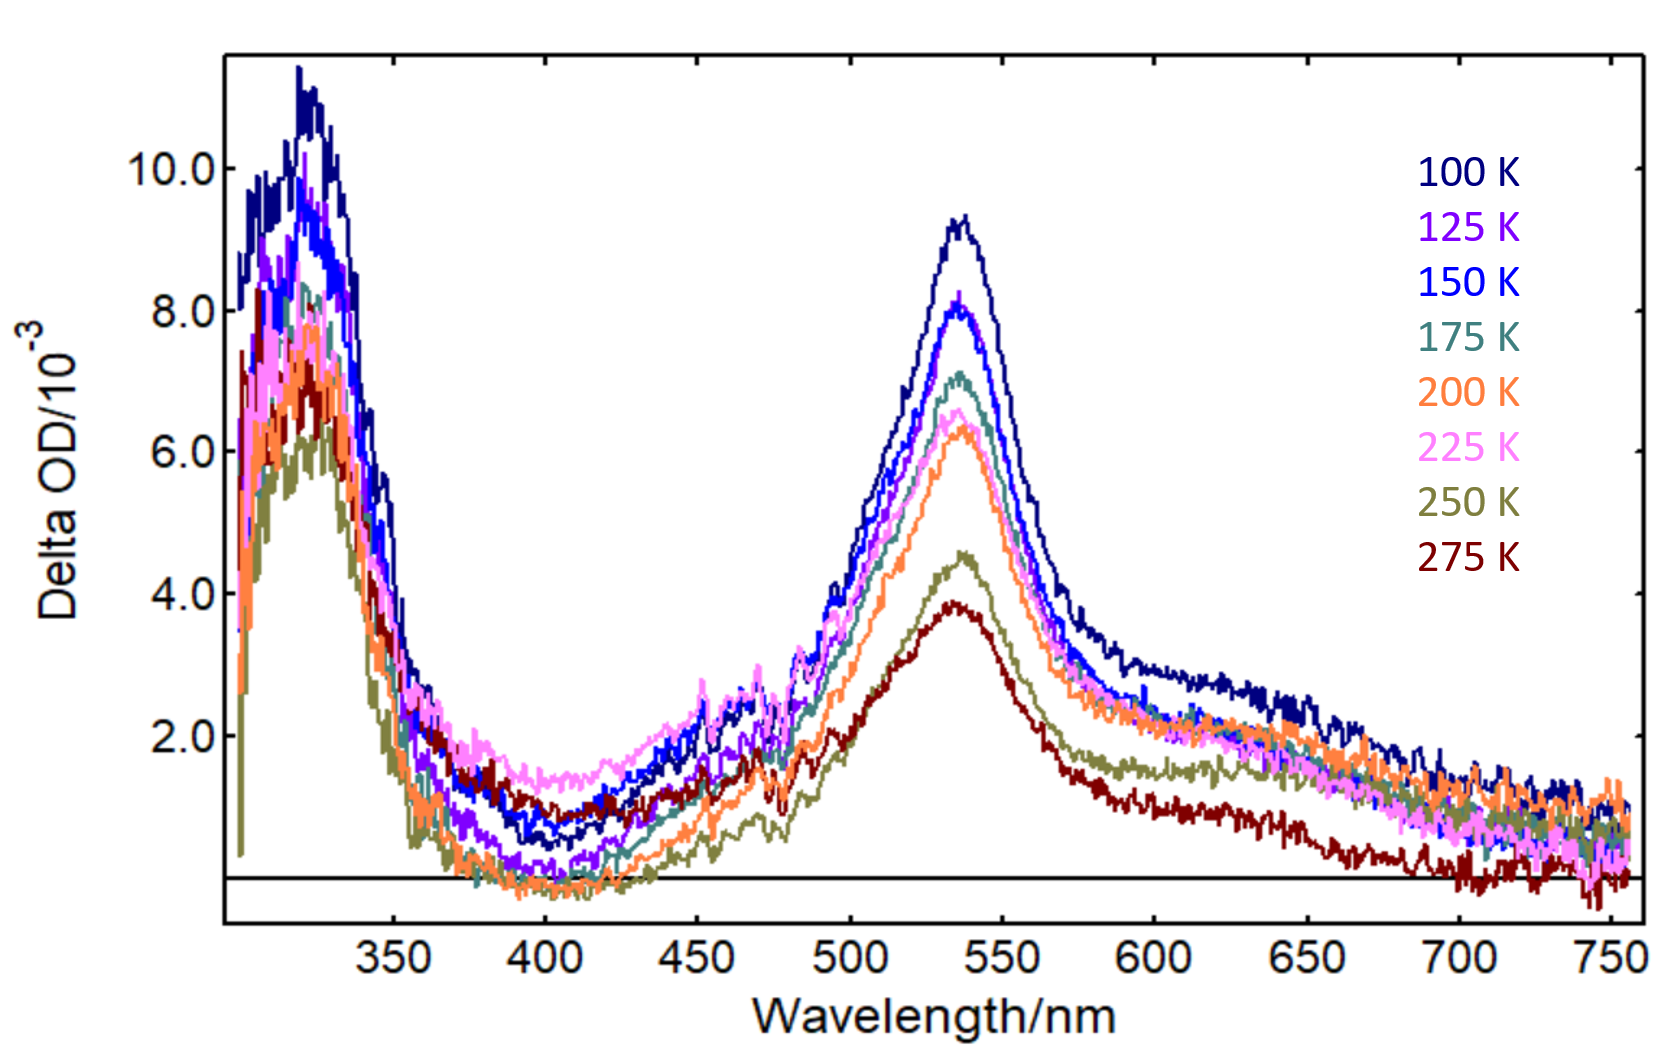 Triplet States: ns-TA spectra of benzophenone-PMMA as a function of temperature obtained in an LP980 Transient Absorption Spectrometer.